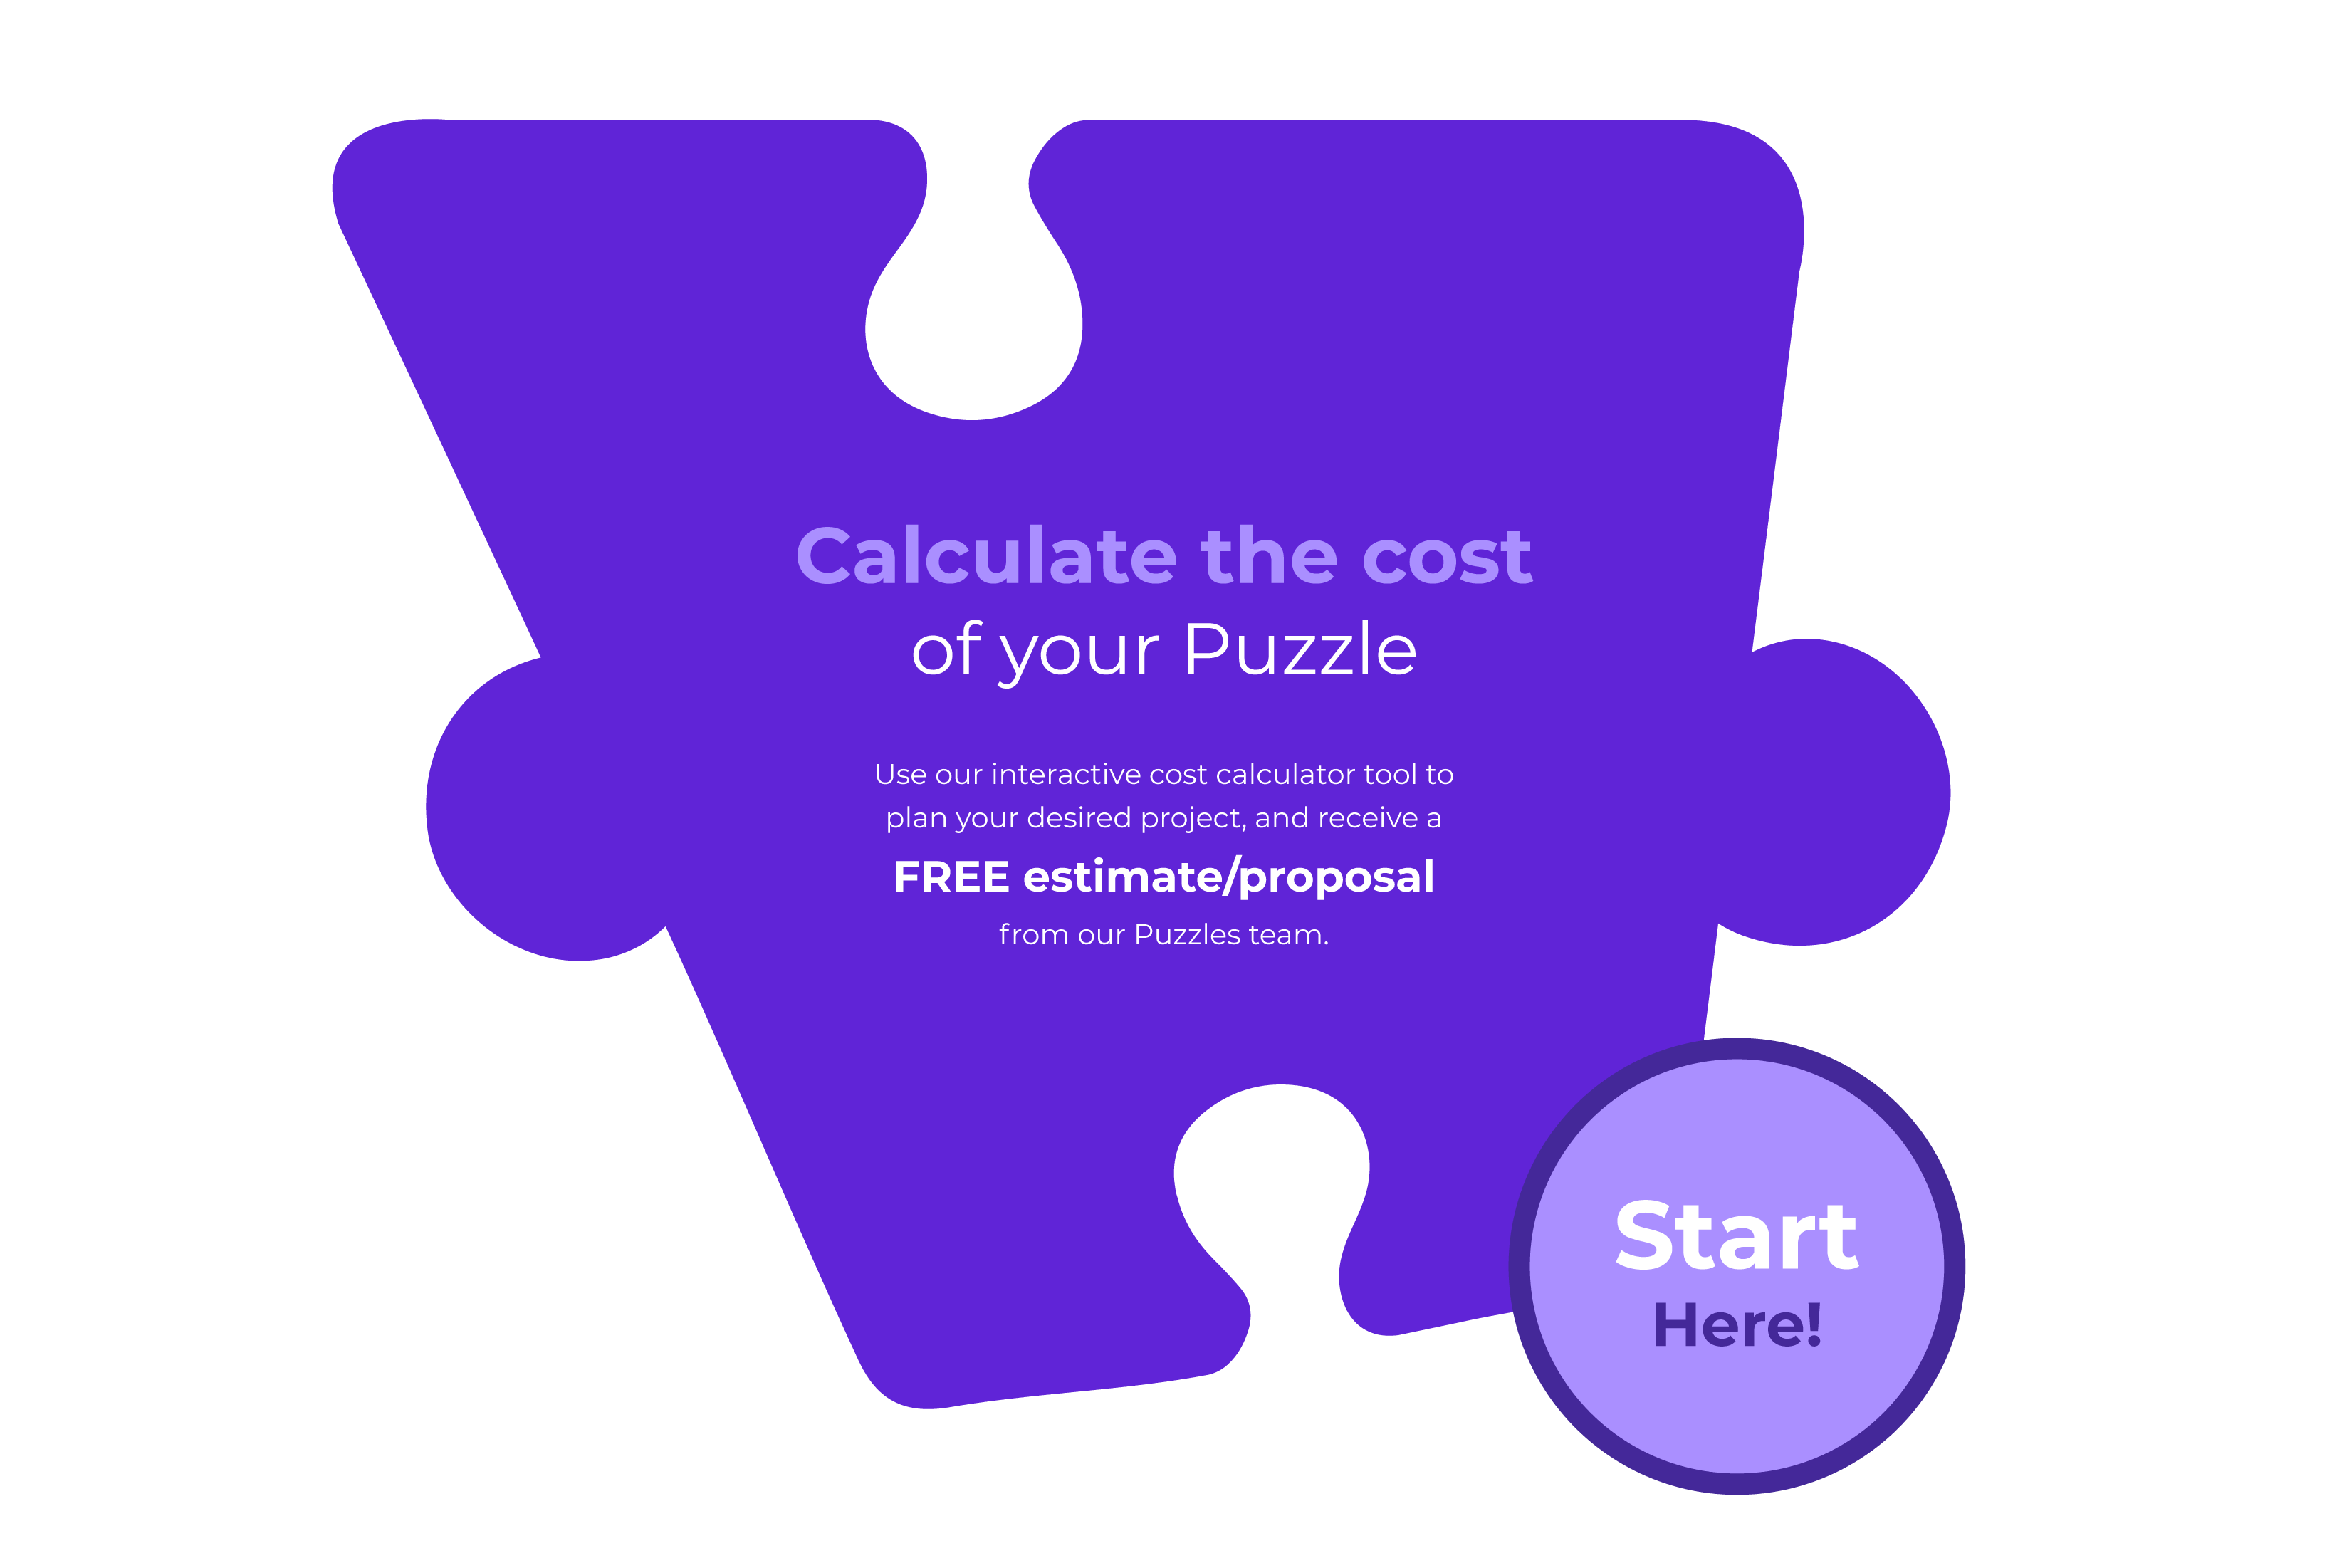 Calculate the cost of your Puzzle Use our interactive cost calculator tool to plan your desired project, and receive a FREE estimate/proposal from our Puzzles team.